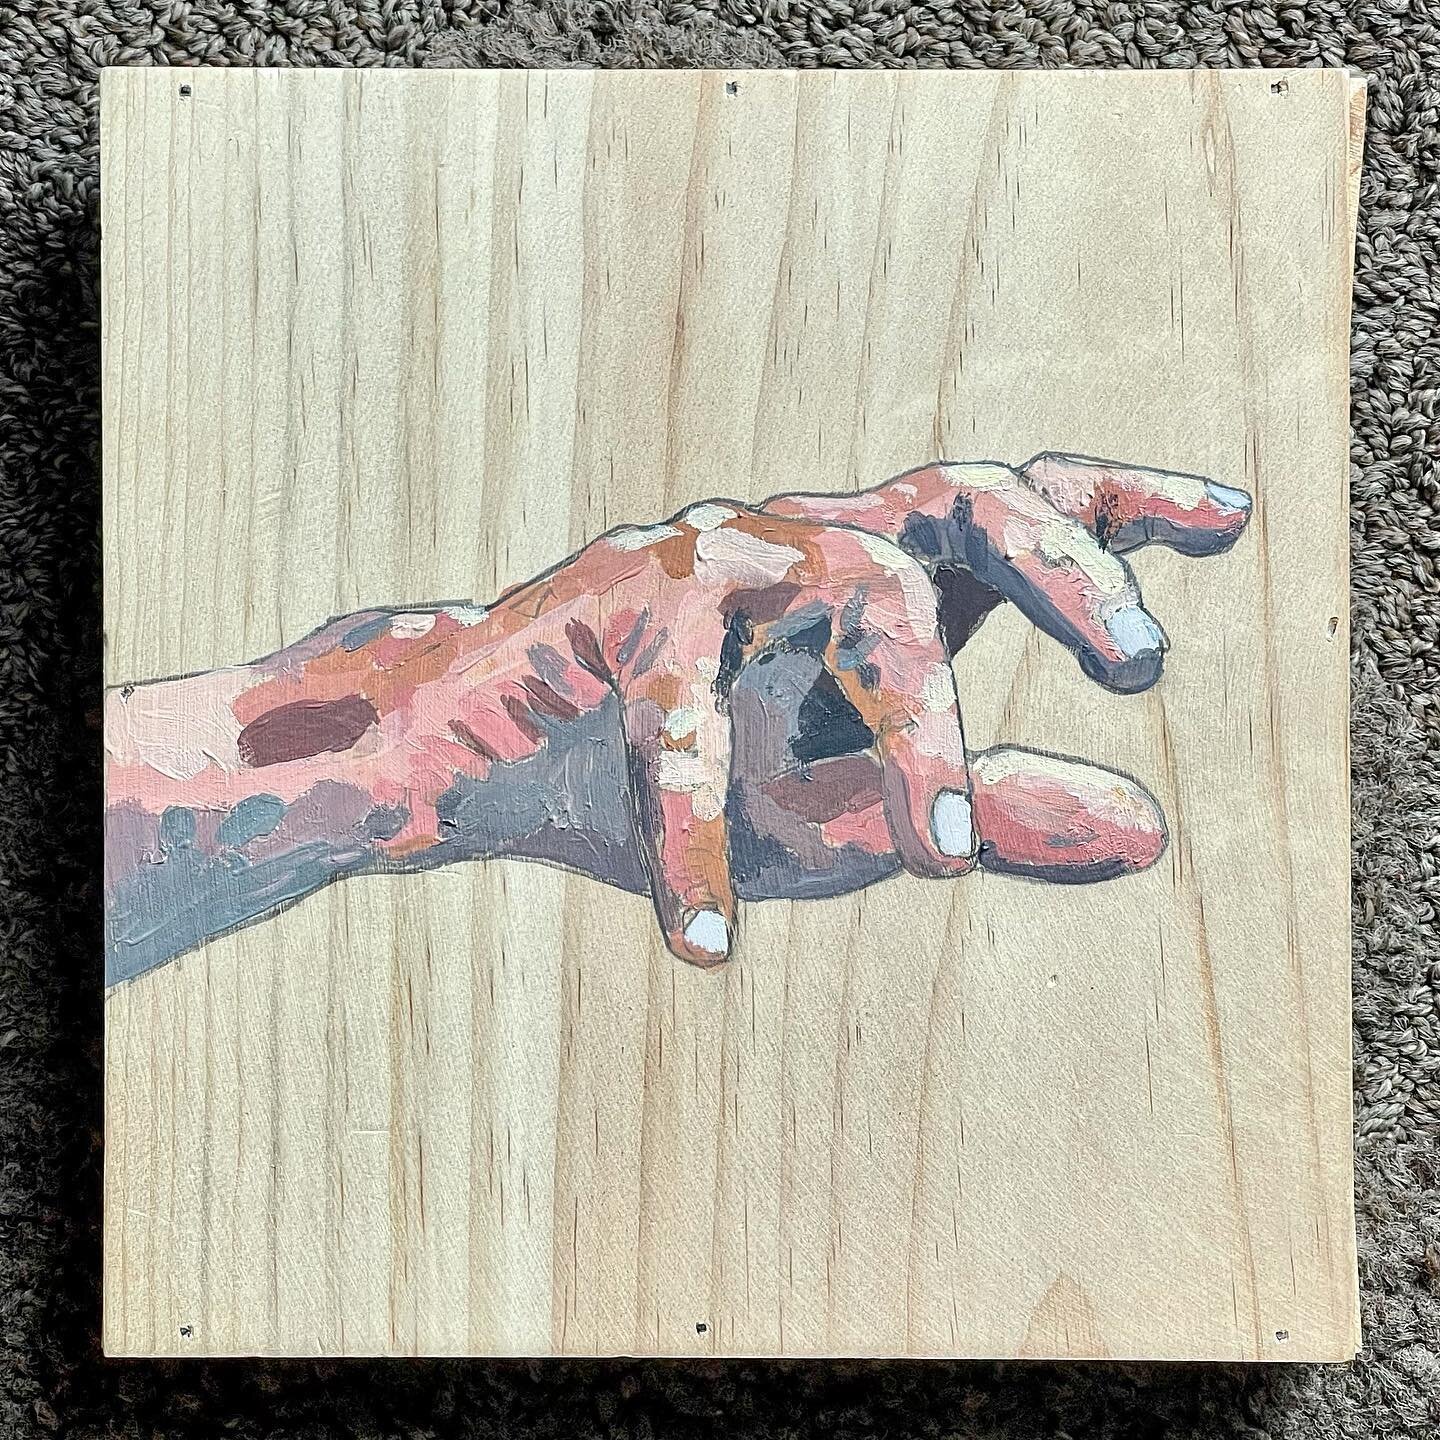 I F&Xi;&Xi;L FФЯ УФЦ IИ MУ SL&Xi;&Xi;P

With a soft hand I reach for you, even when you aren't there...

Work in progress...
8&quot;X8&quot; acrylic on wooden panel

#ruffcreator #ruffmadeart #workinprogress #hands #loneliness #wheniseeyouagain2023 #